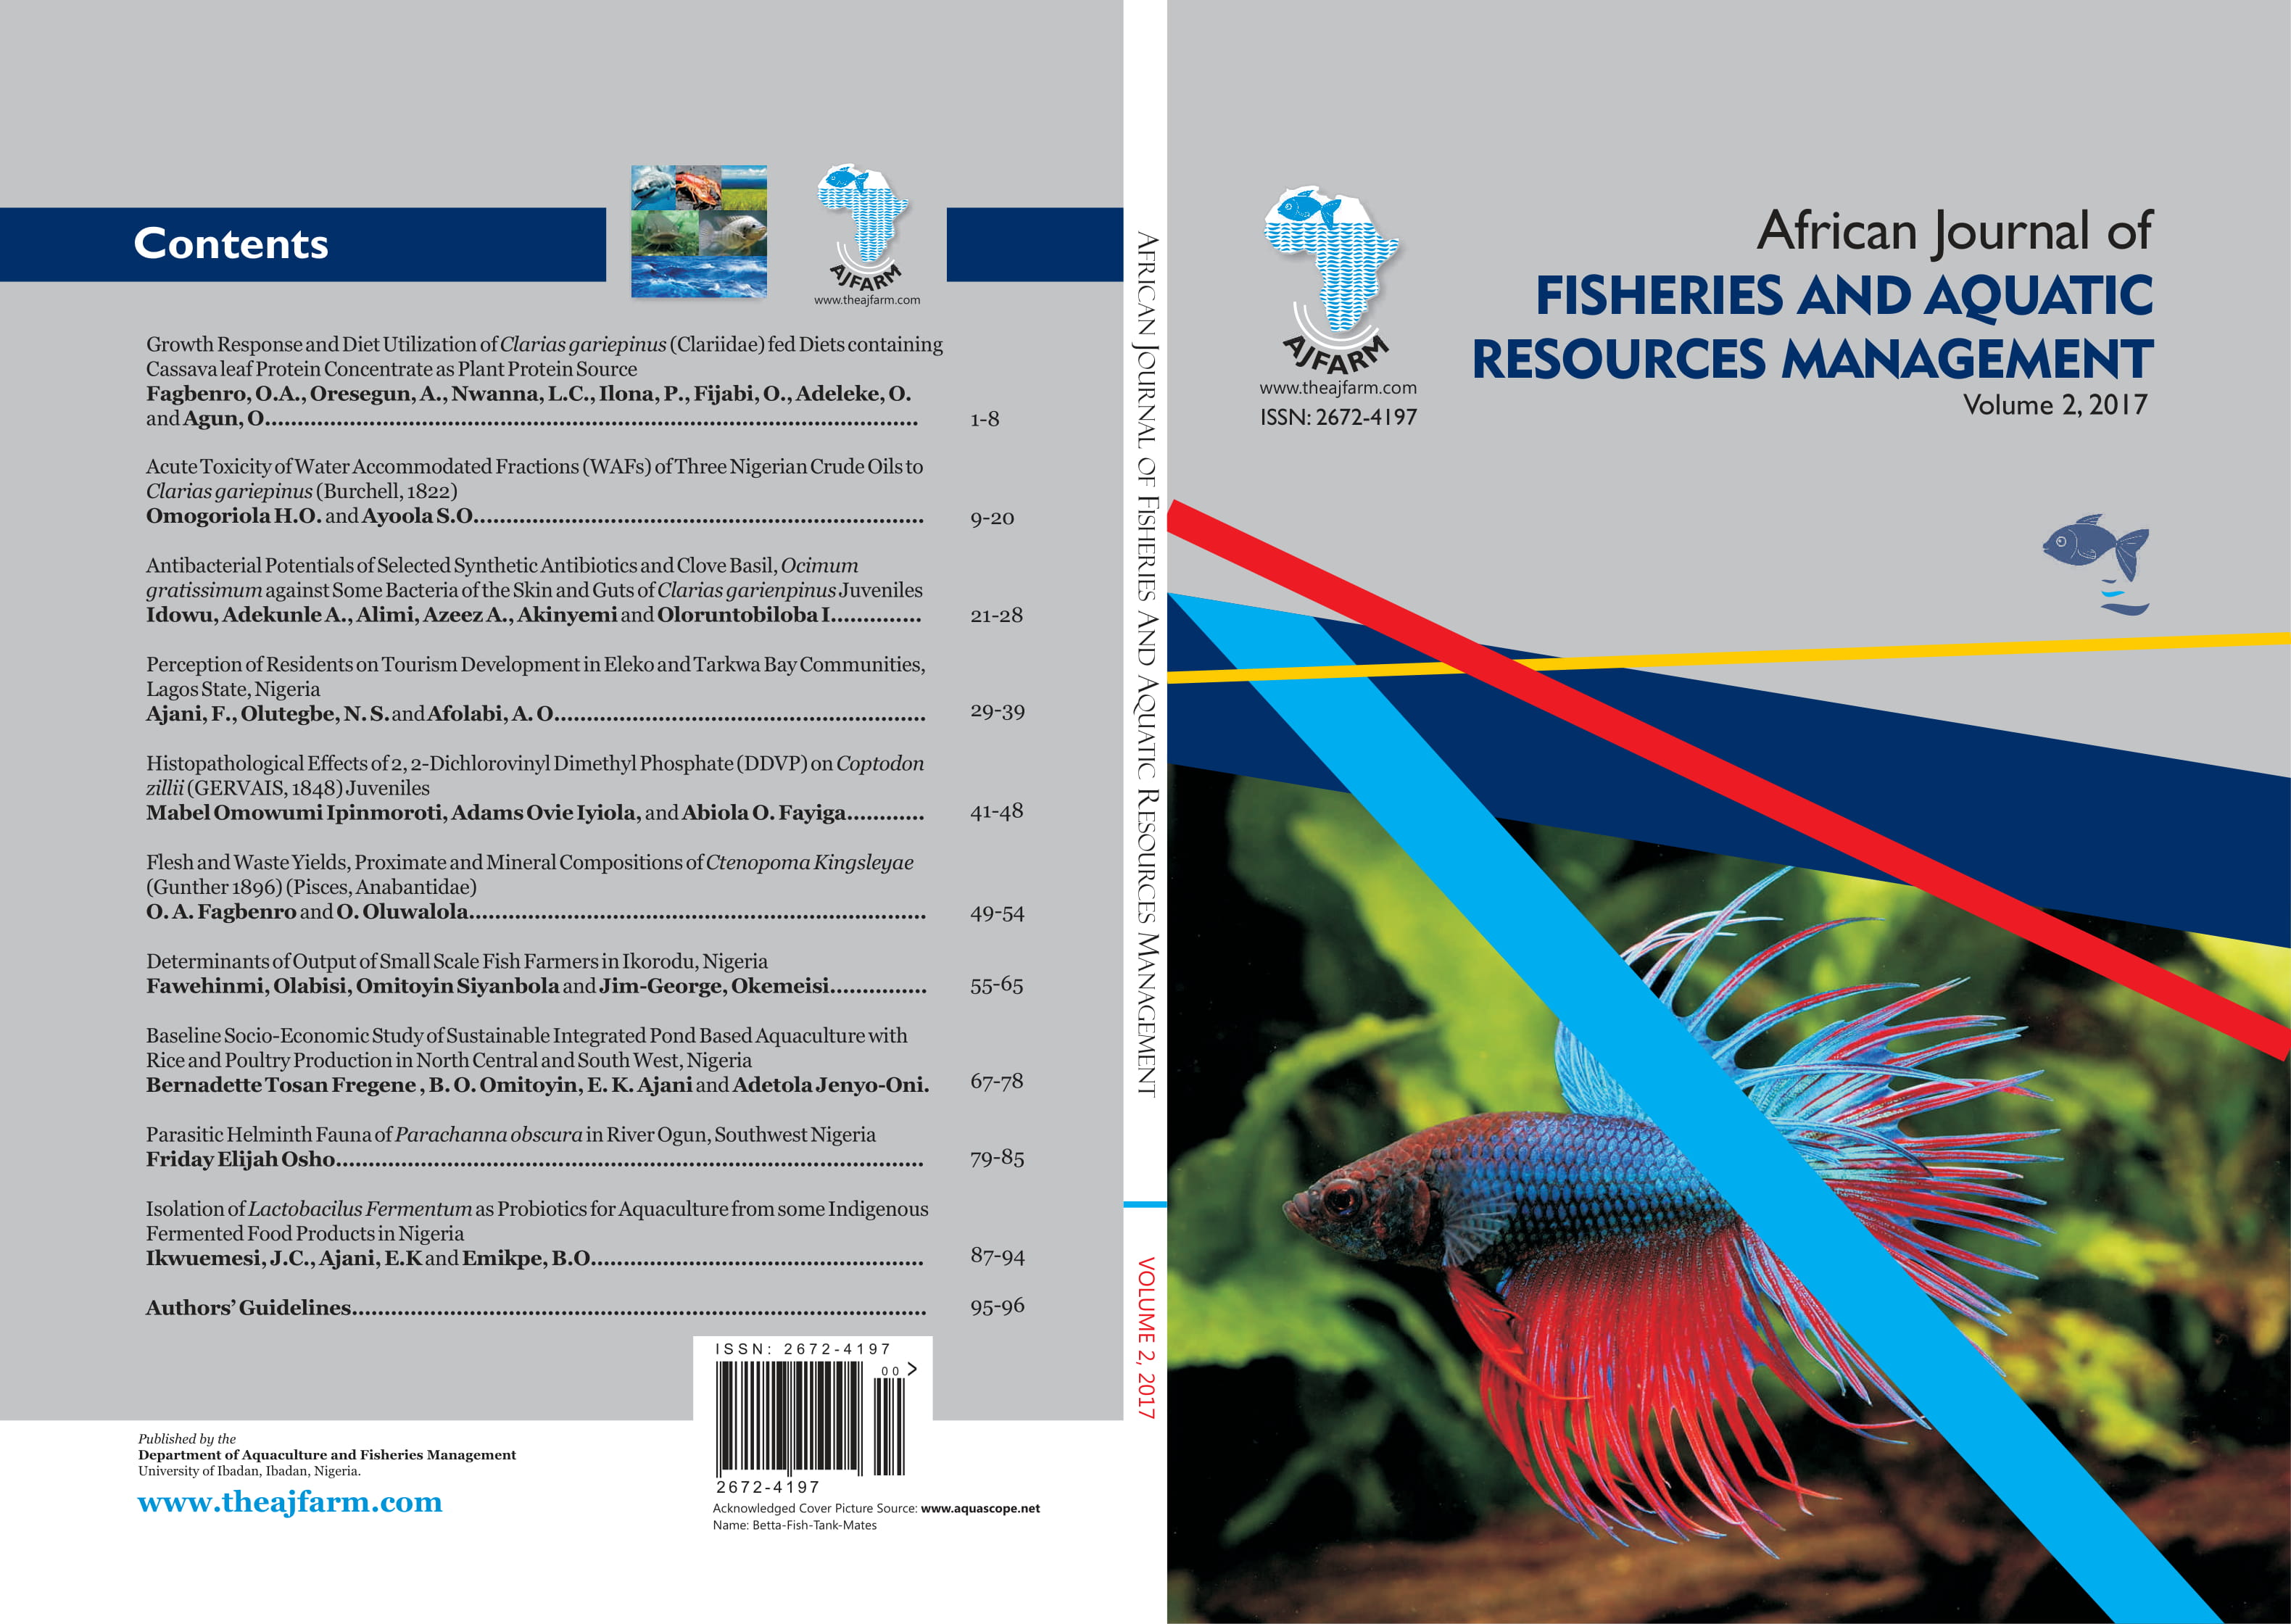 					View Vol. 2 (2017): African Journal of FISHERIES AND AQUATIC RESOURCES MANAGEMENT
				